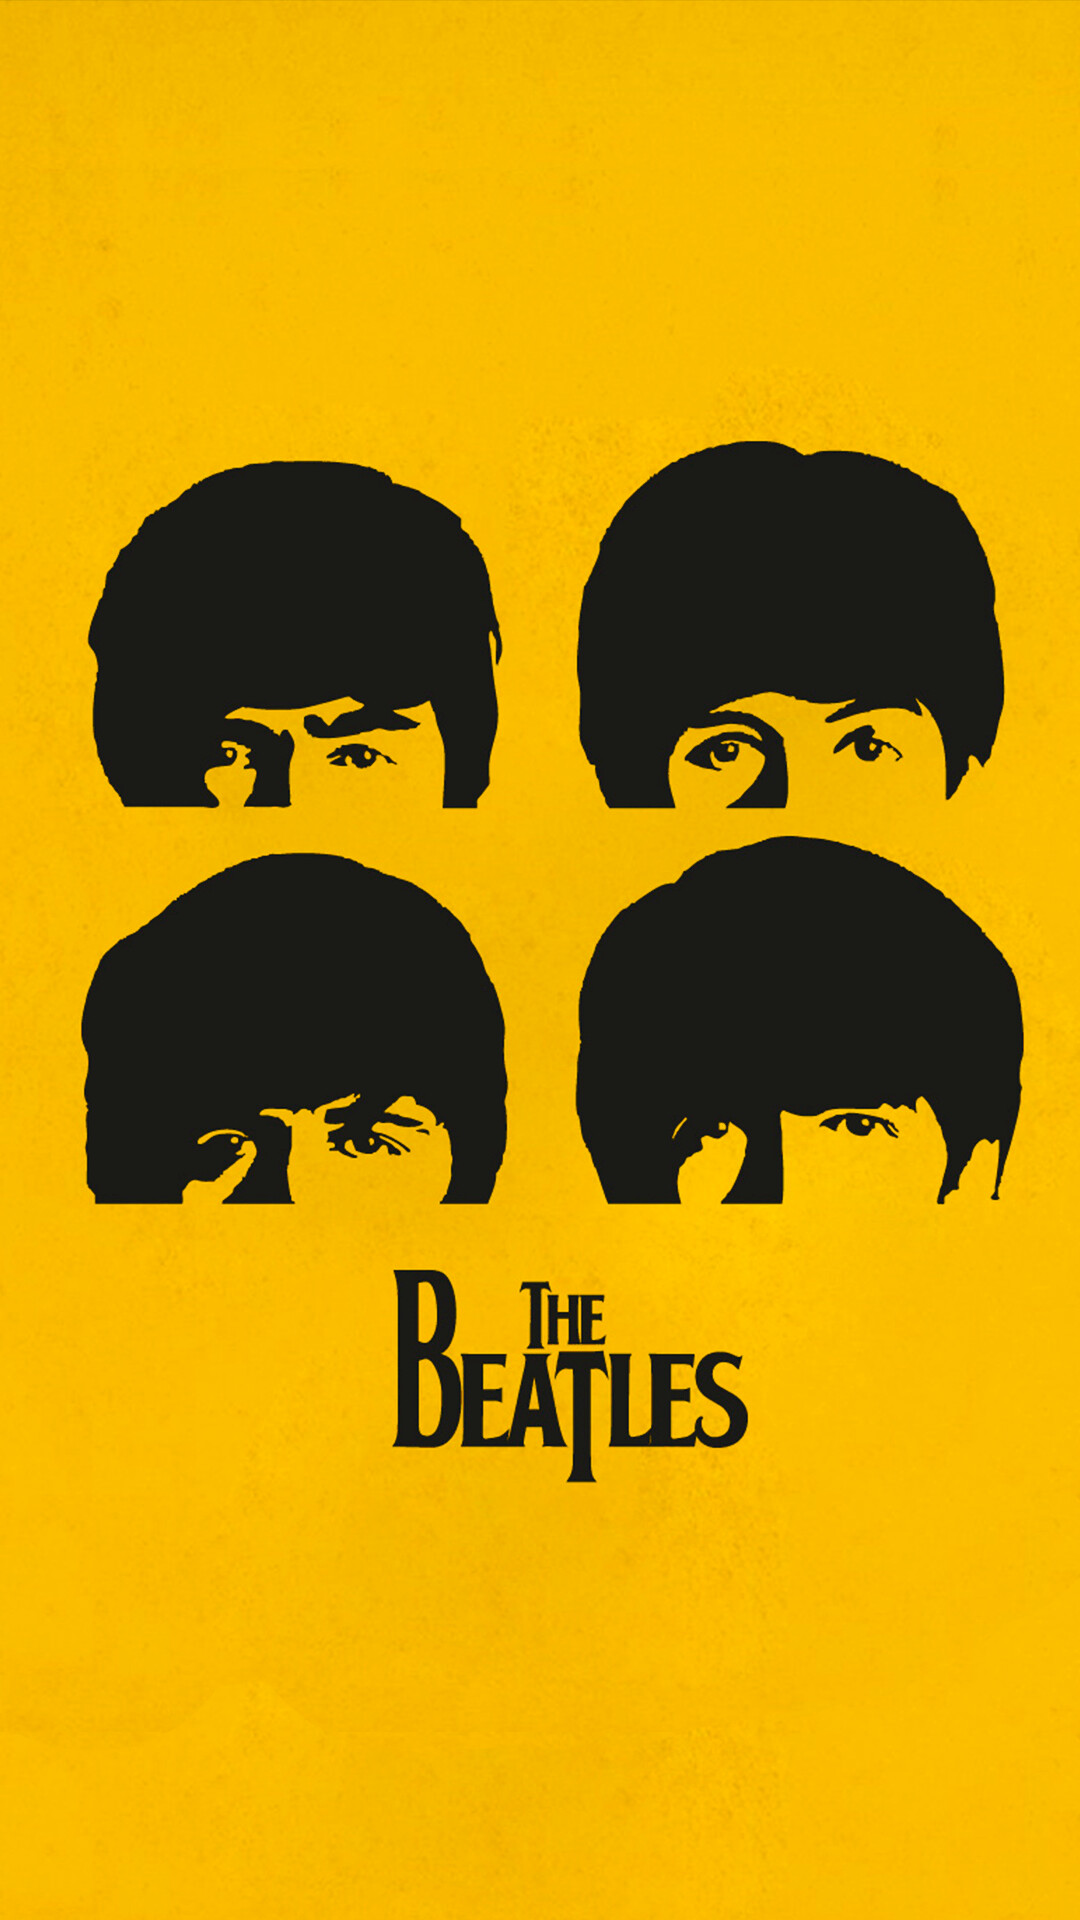 The Beatles: "I Want You (She's So Heavy)" became the final song recorded by the band. 1080x1920 Full HD Background.